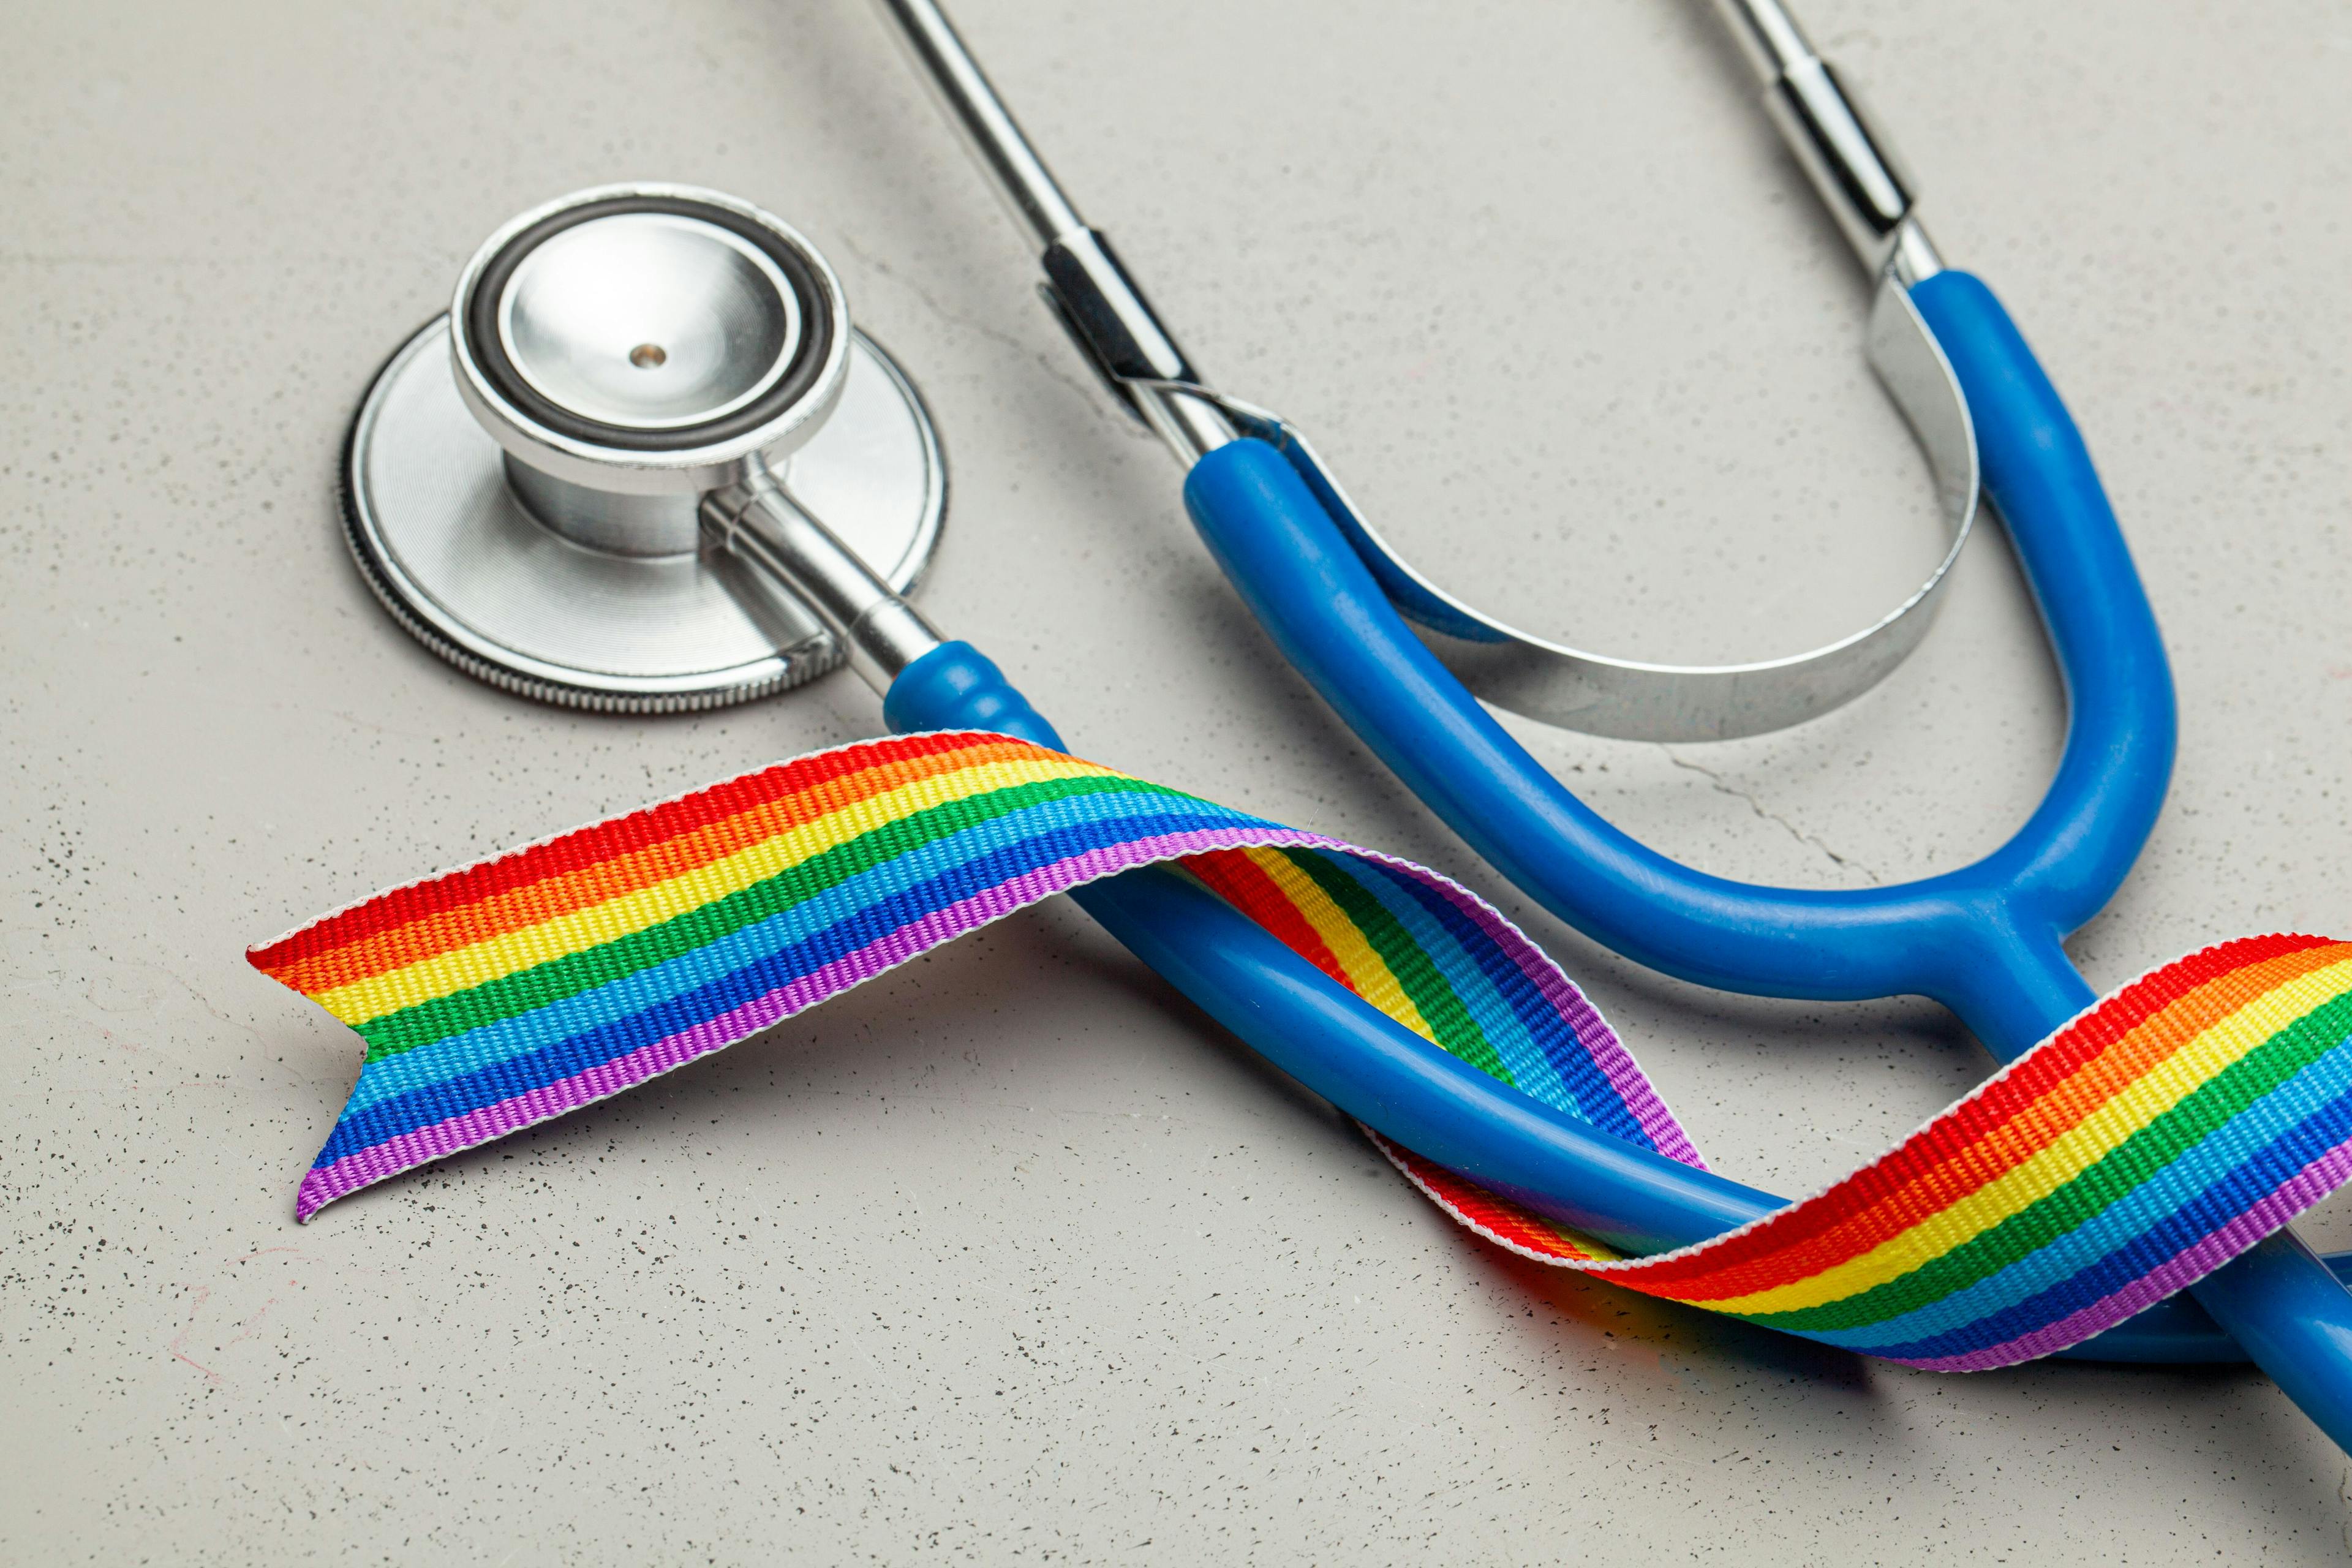 Two-Part Questions Can Improve Cancer Care in LGBTQ Patients